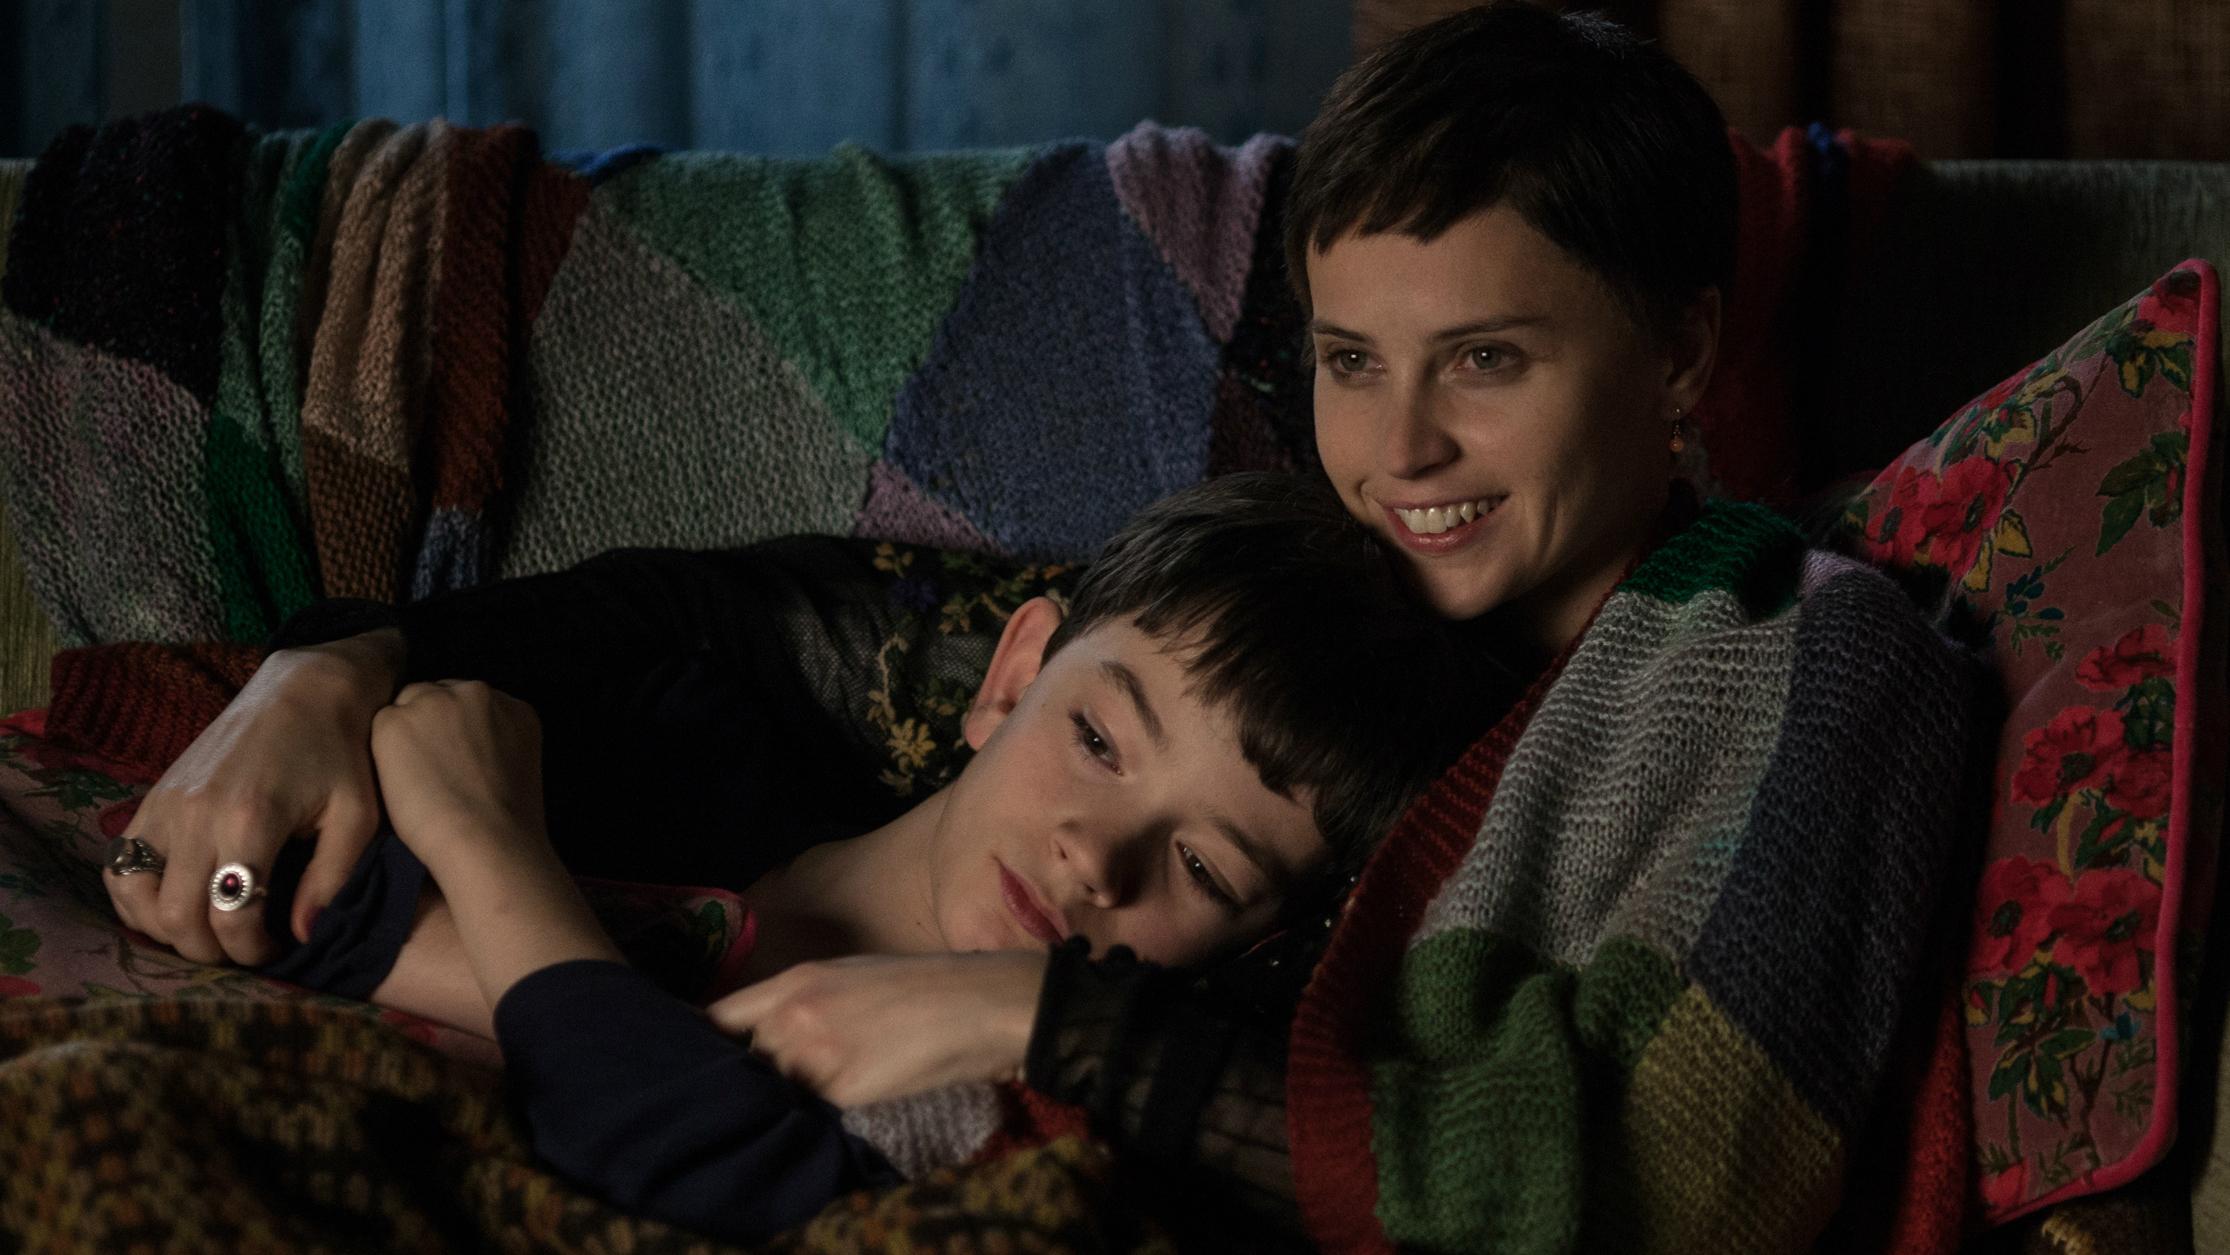 Lewis MacDougall and Felicity Jones star in a stylish blend of the fantastical and the everyday